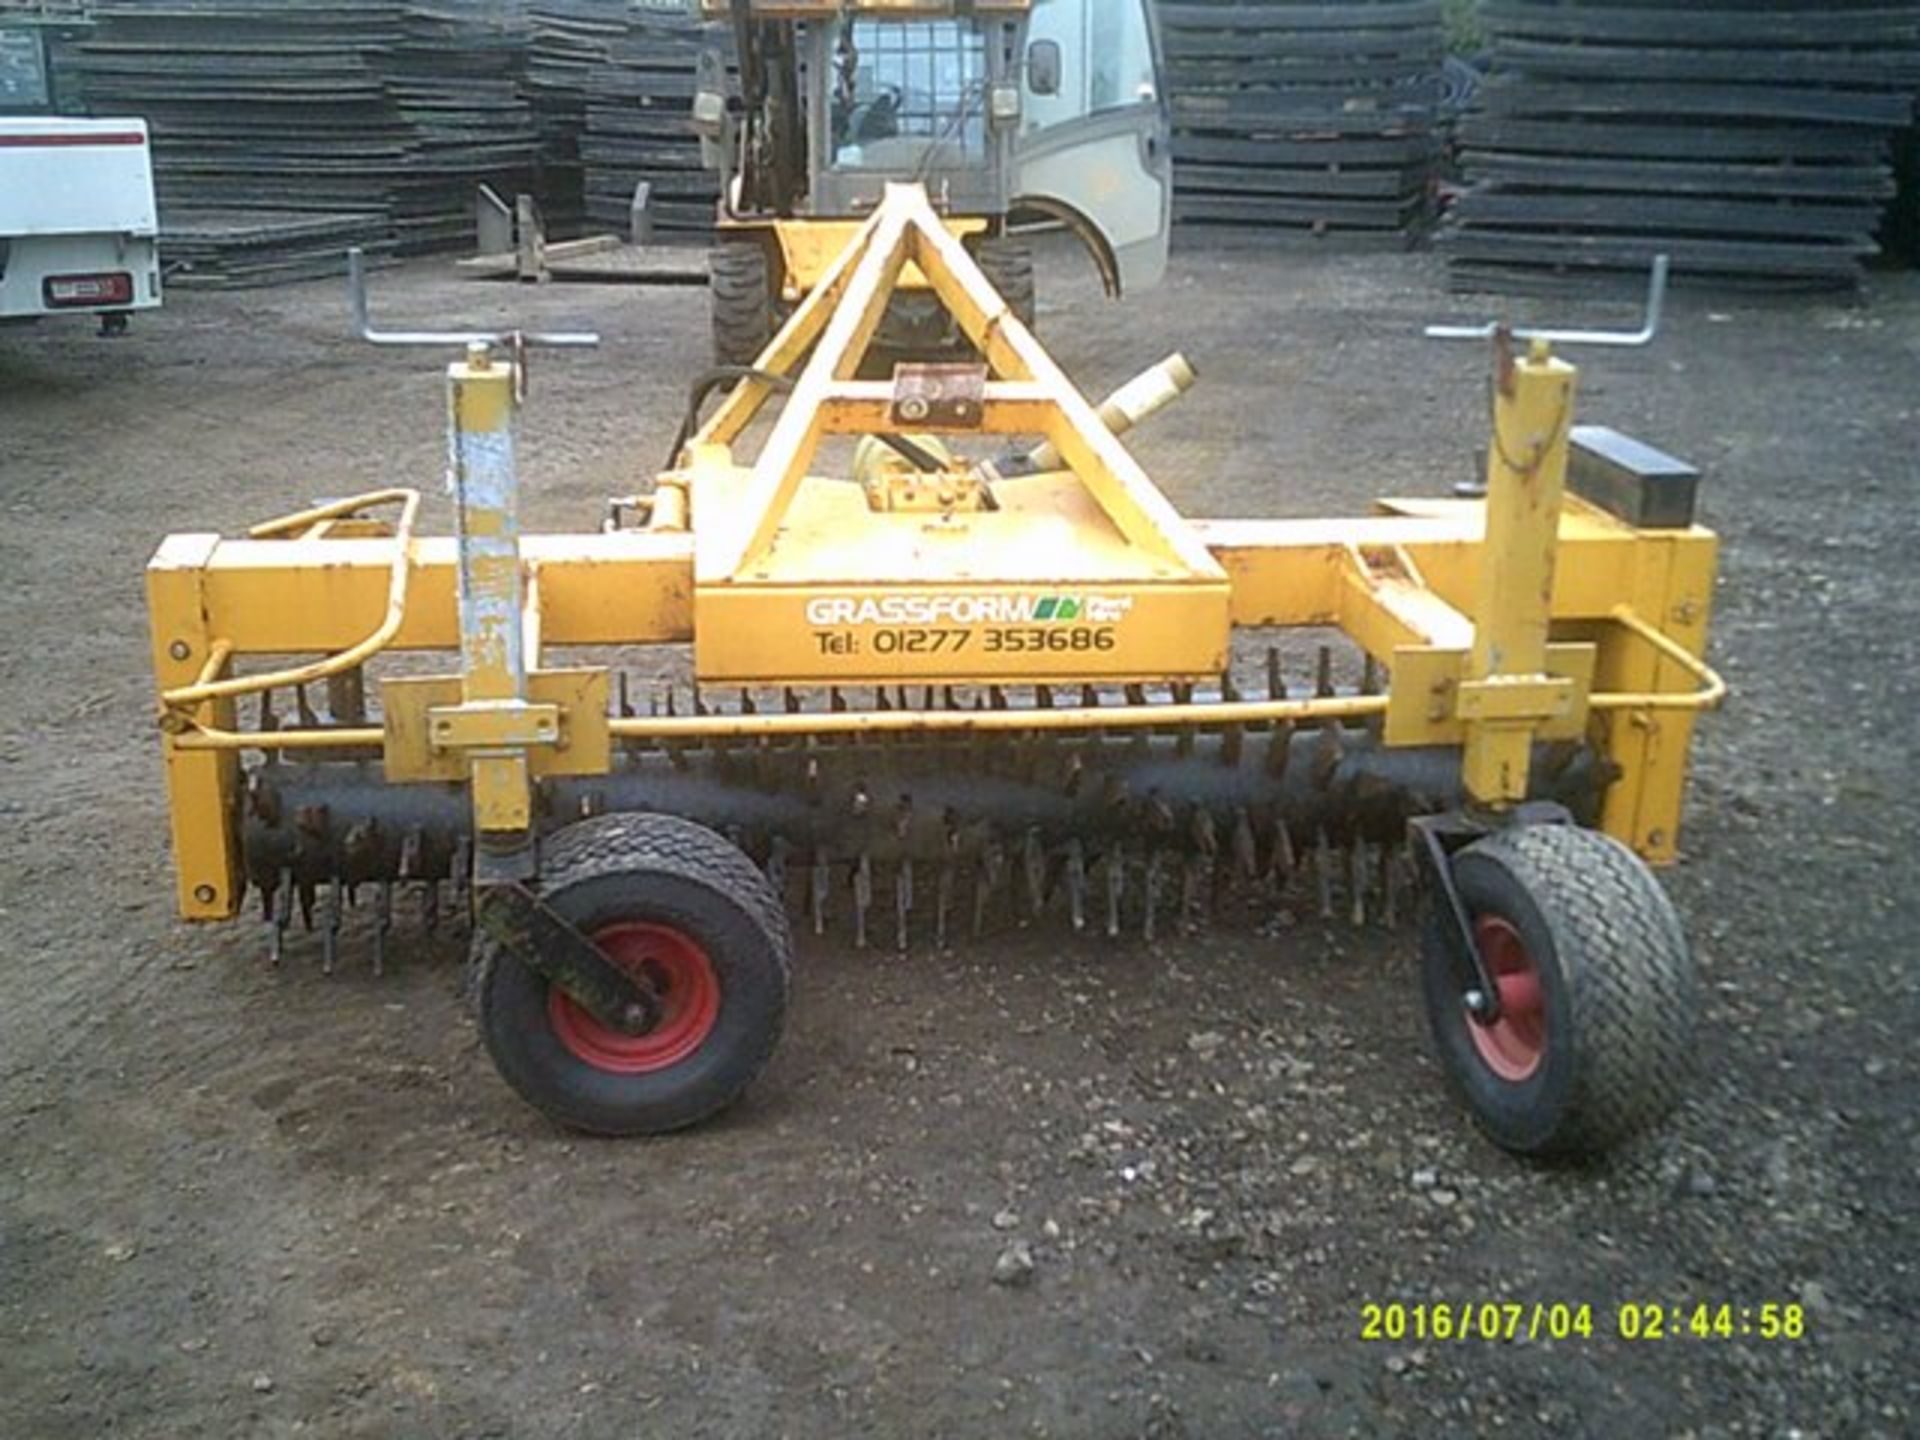 Blec SR8 stone rake, 2.55m wide approx. - Image 5 of 7